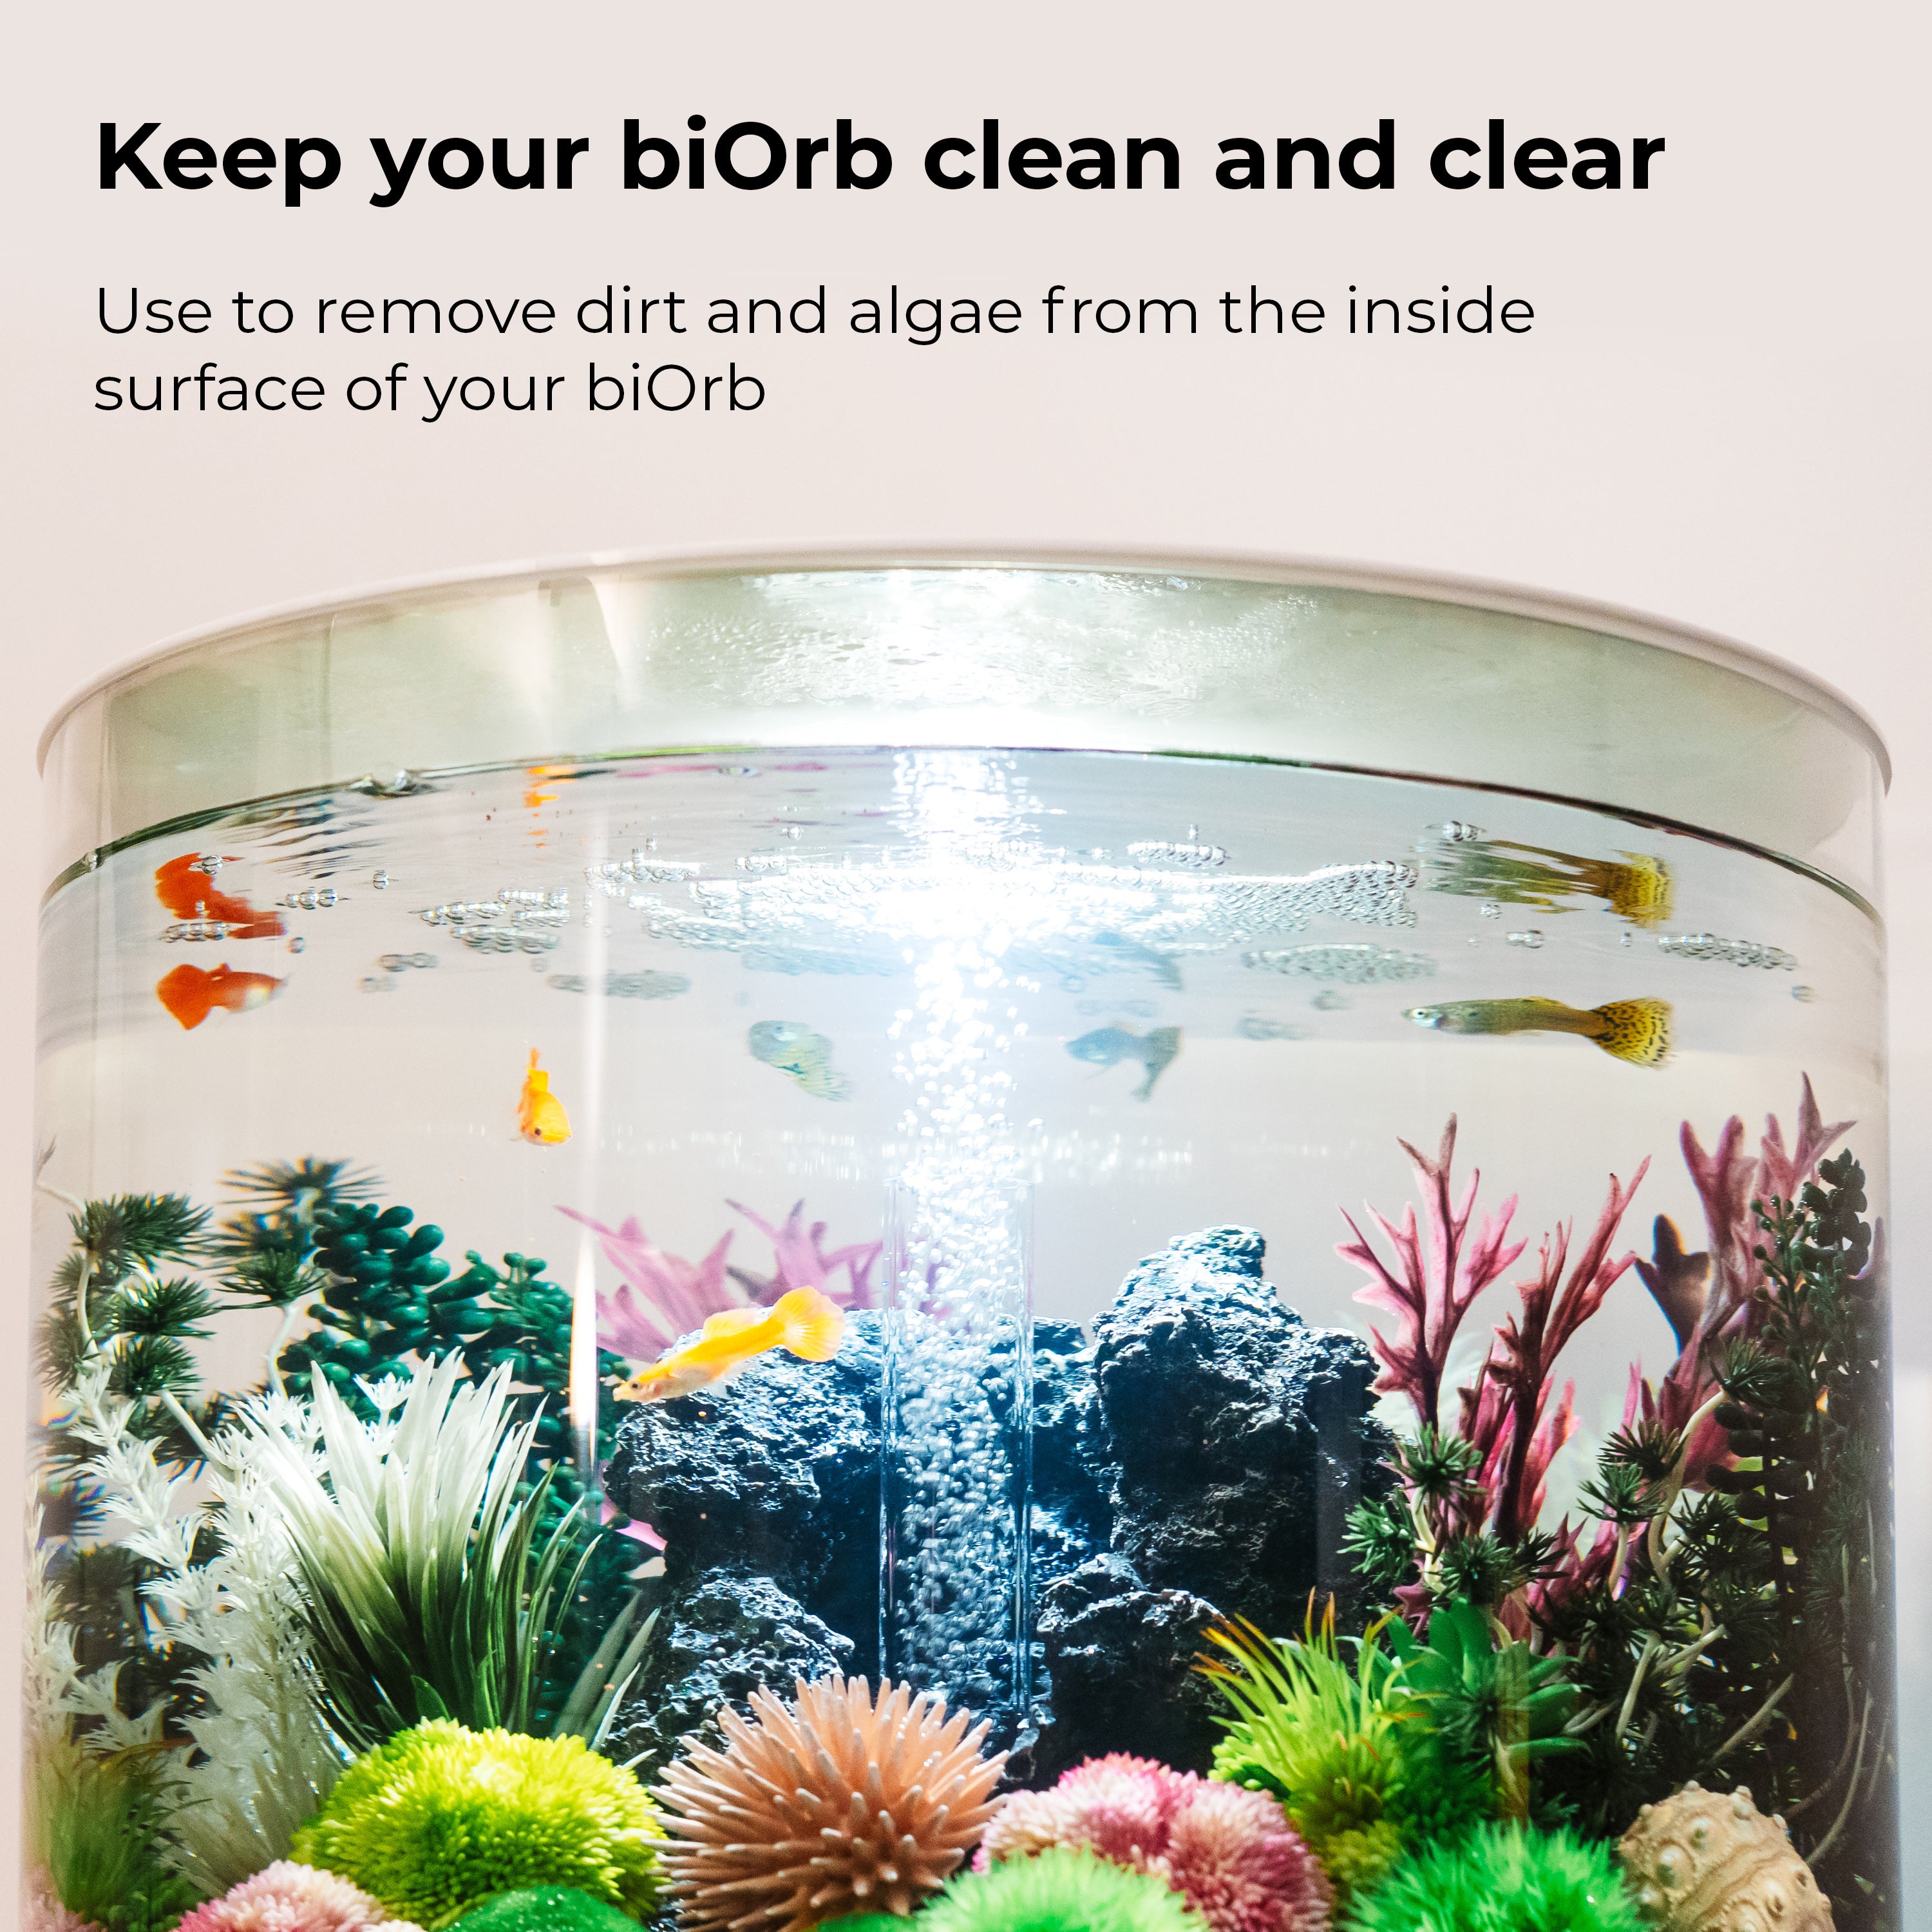 Cleaning Pads - Keep your biOrb clean and clear